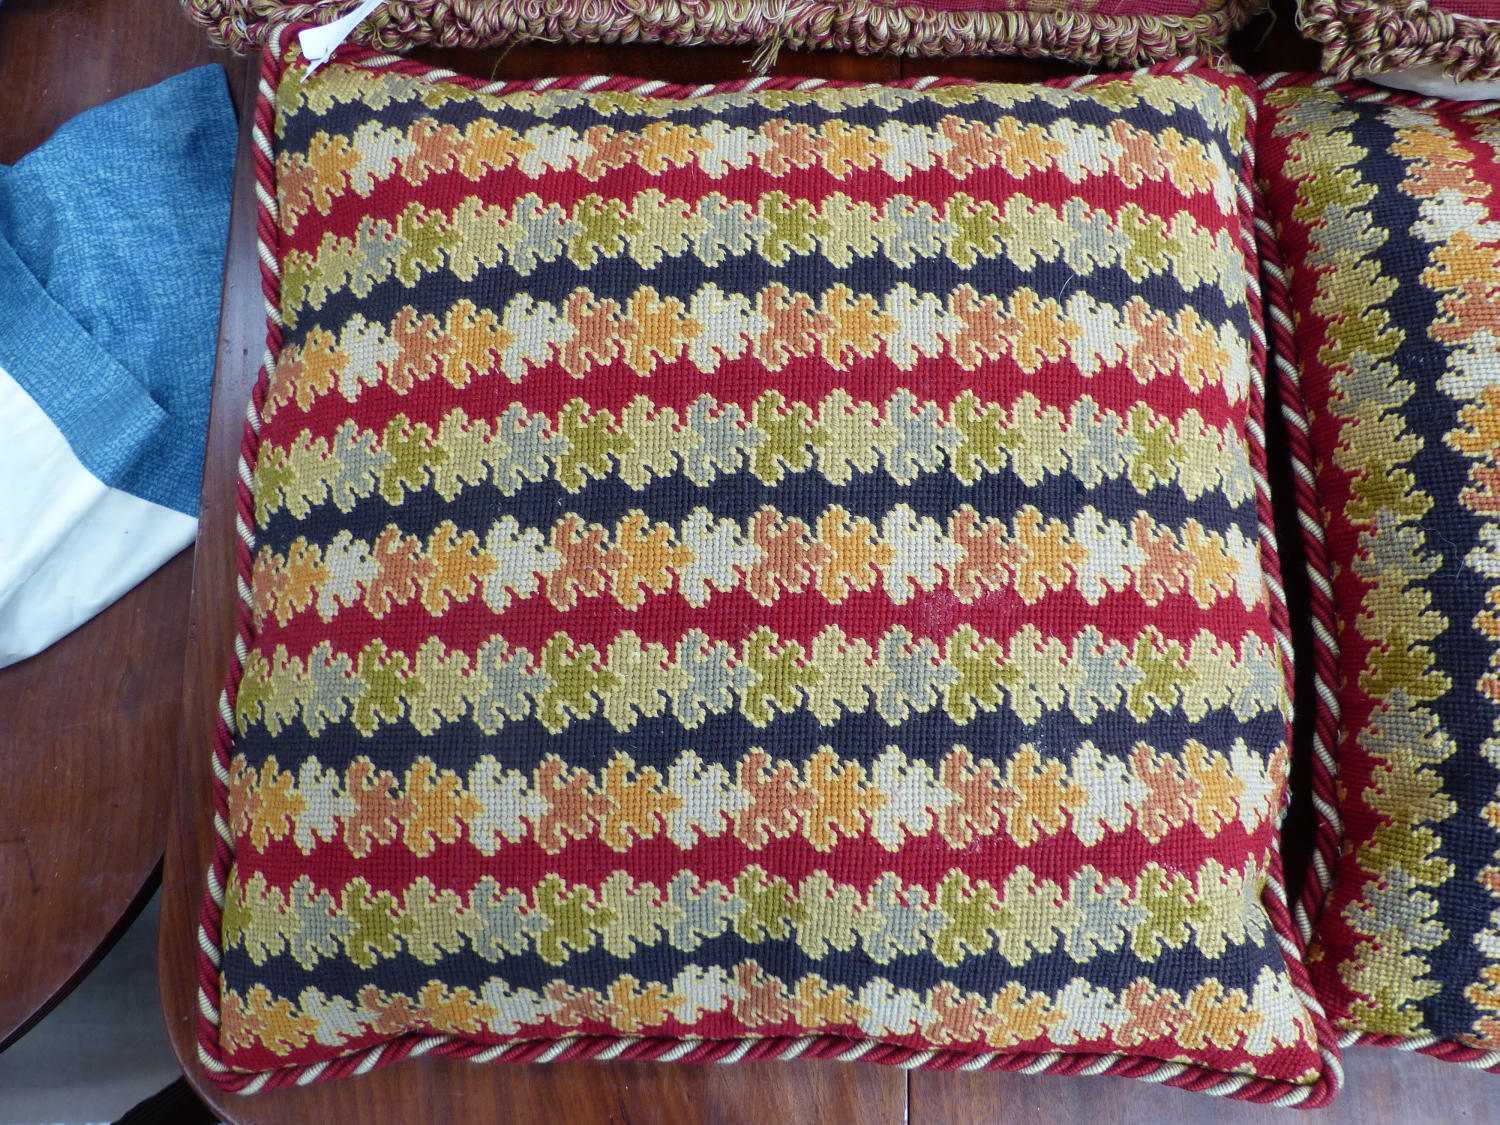 SIX NEEDLEPOINT SCATTER CUSHIONS. - Image 2 of 10